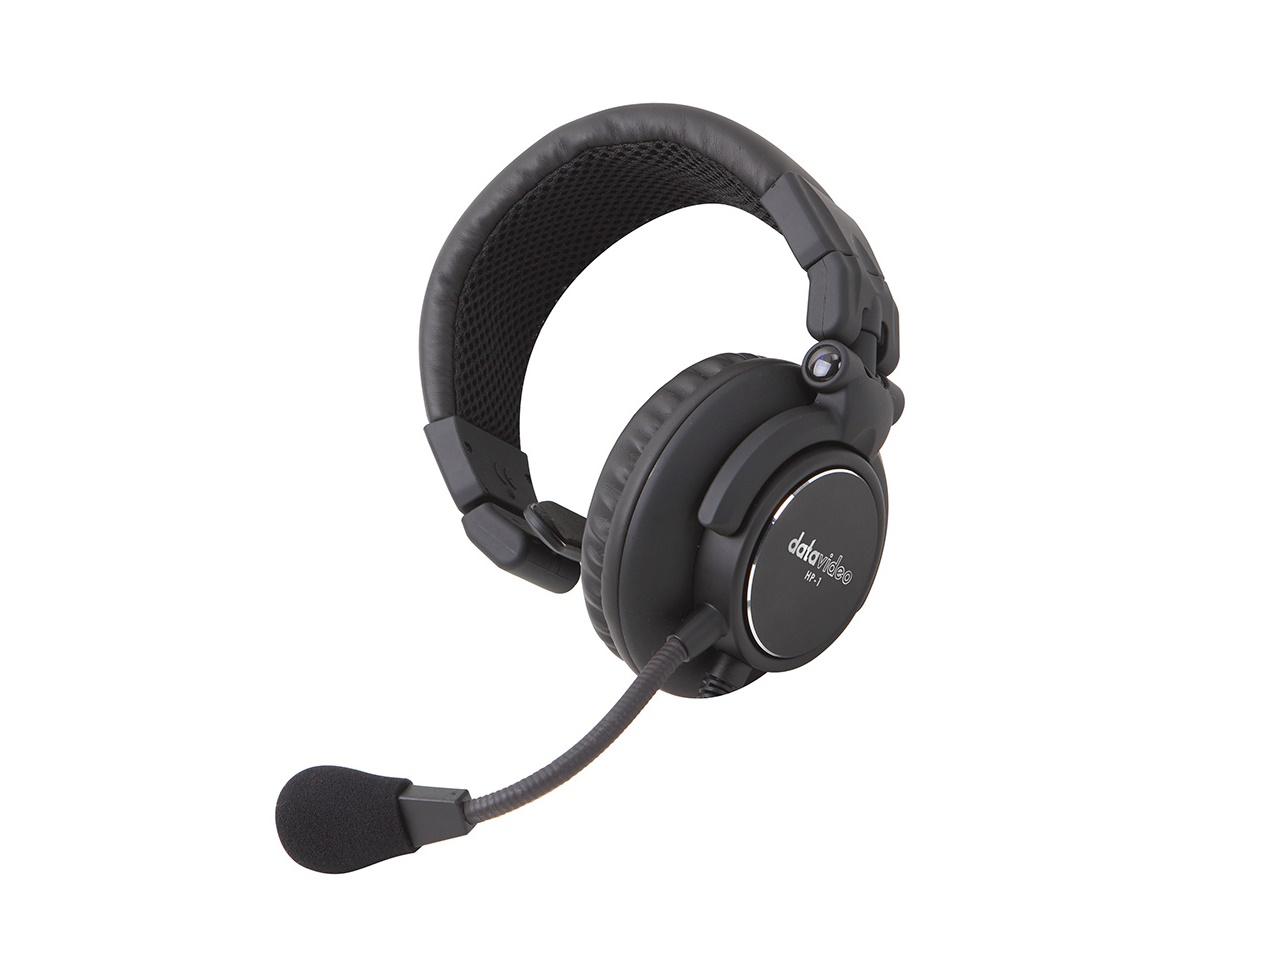 Datavideo HP1 Single-Ear Headset with Mic for the ITC-100 Belt Packs and Base Station